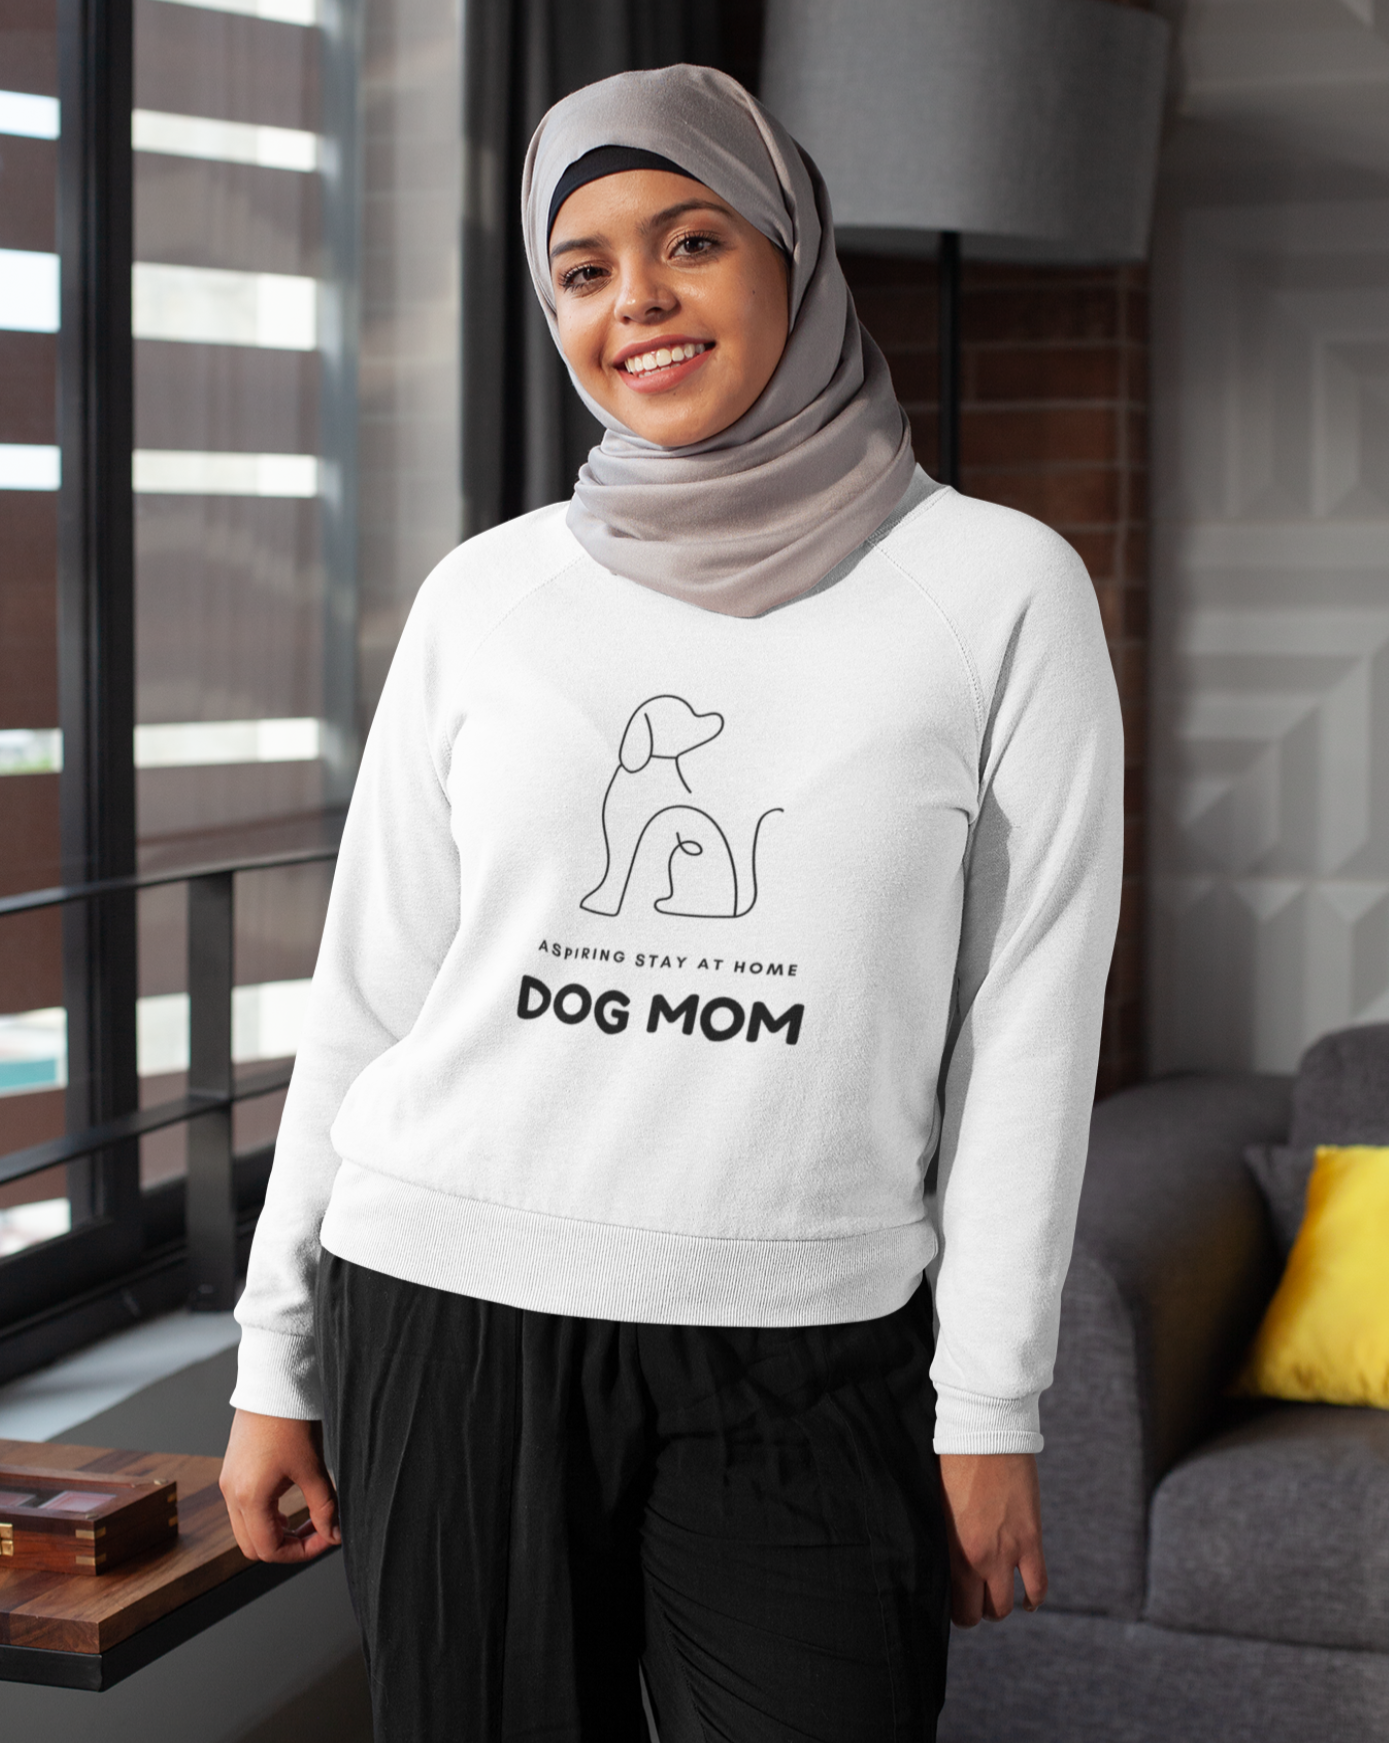 When your only aspiration in life is to make sure your dog has the best life possible.  This funny Aspiring Stay at Home Dog Mom crewneck sweatshirt is made with 100% cotton blend so it is super soft and comfortable. Perfect for morning walks or cuddling on the couch with your furry friend, this will be your new favorite sweatshirt guaranteed. 